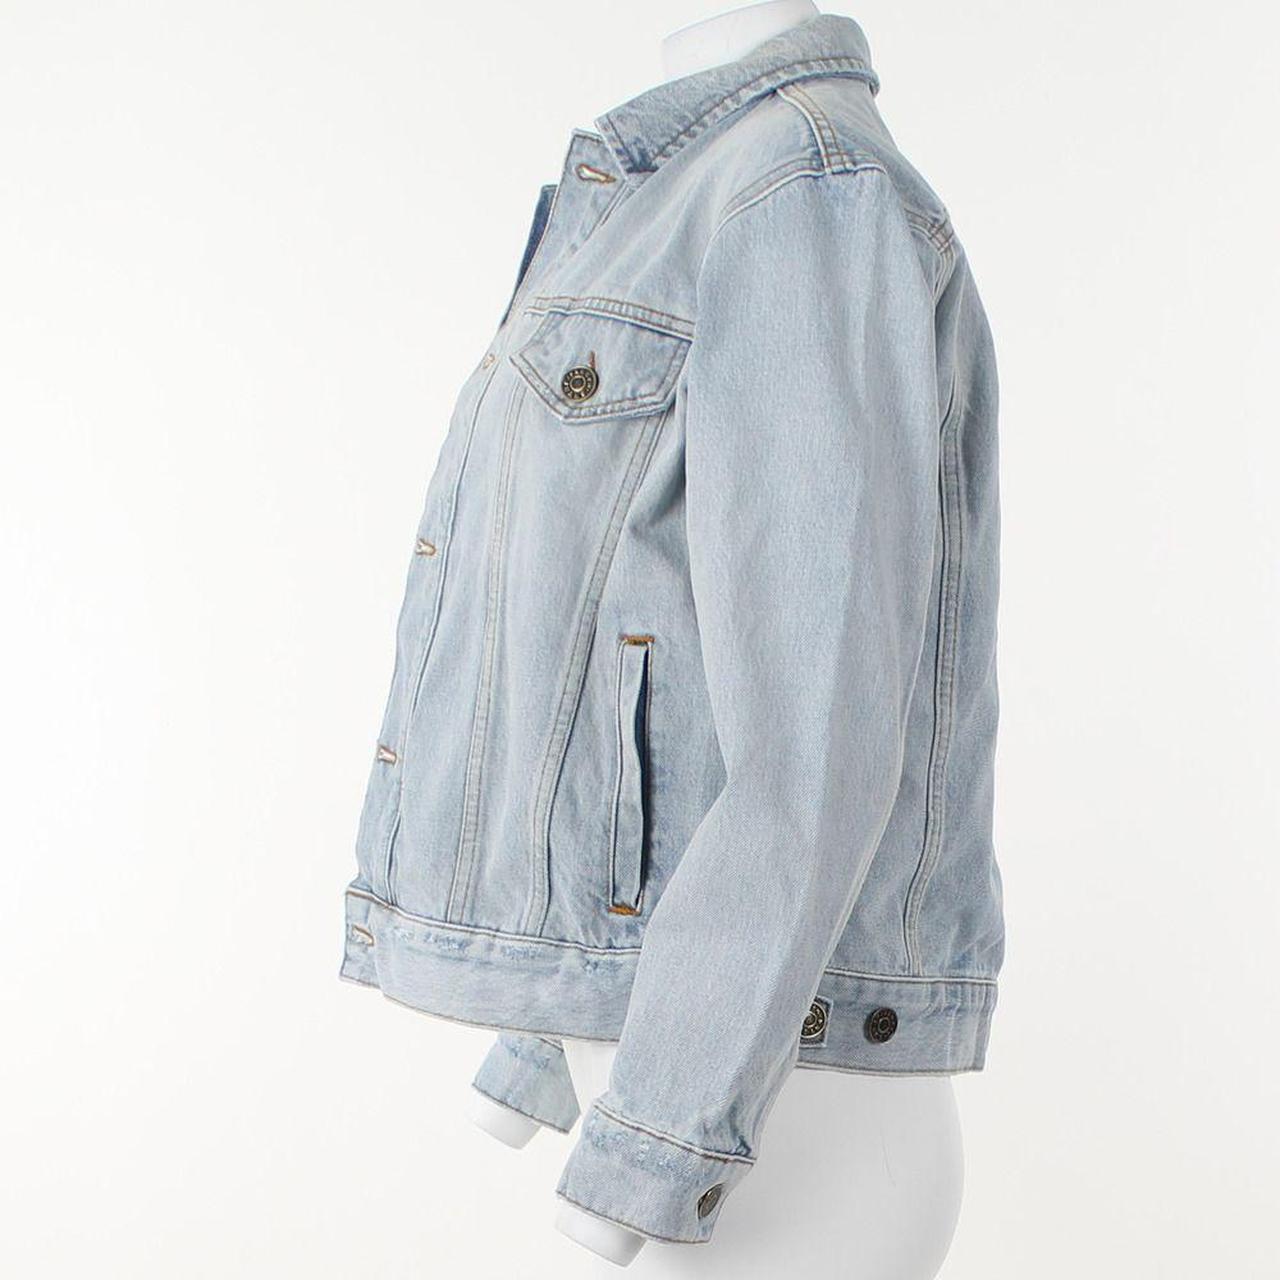 Product Image 2 - Made from bleached-out nonstretch denim,